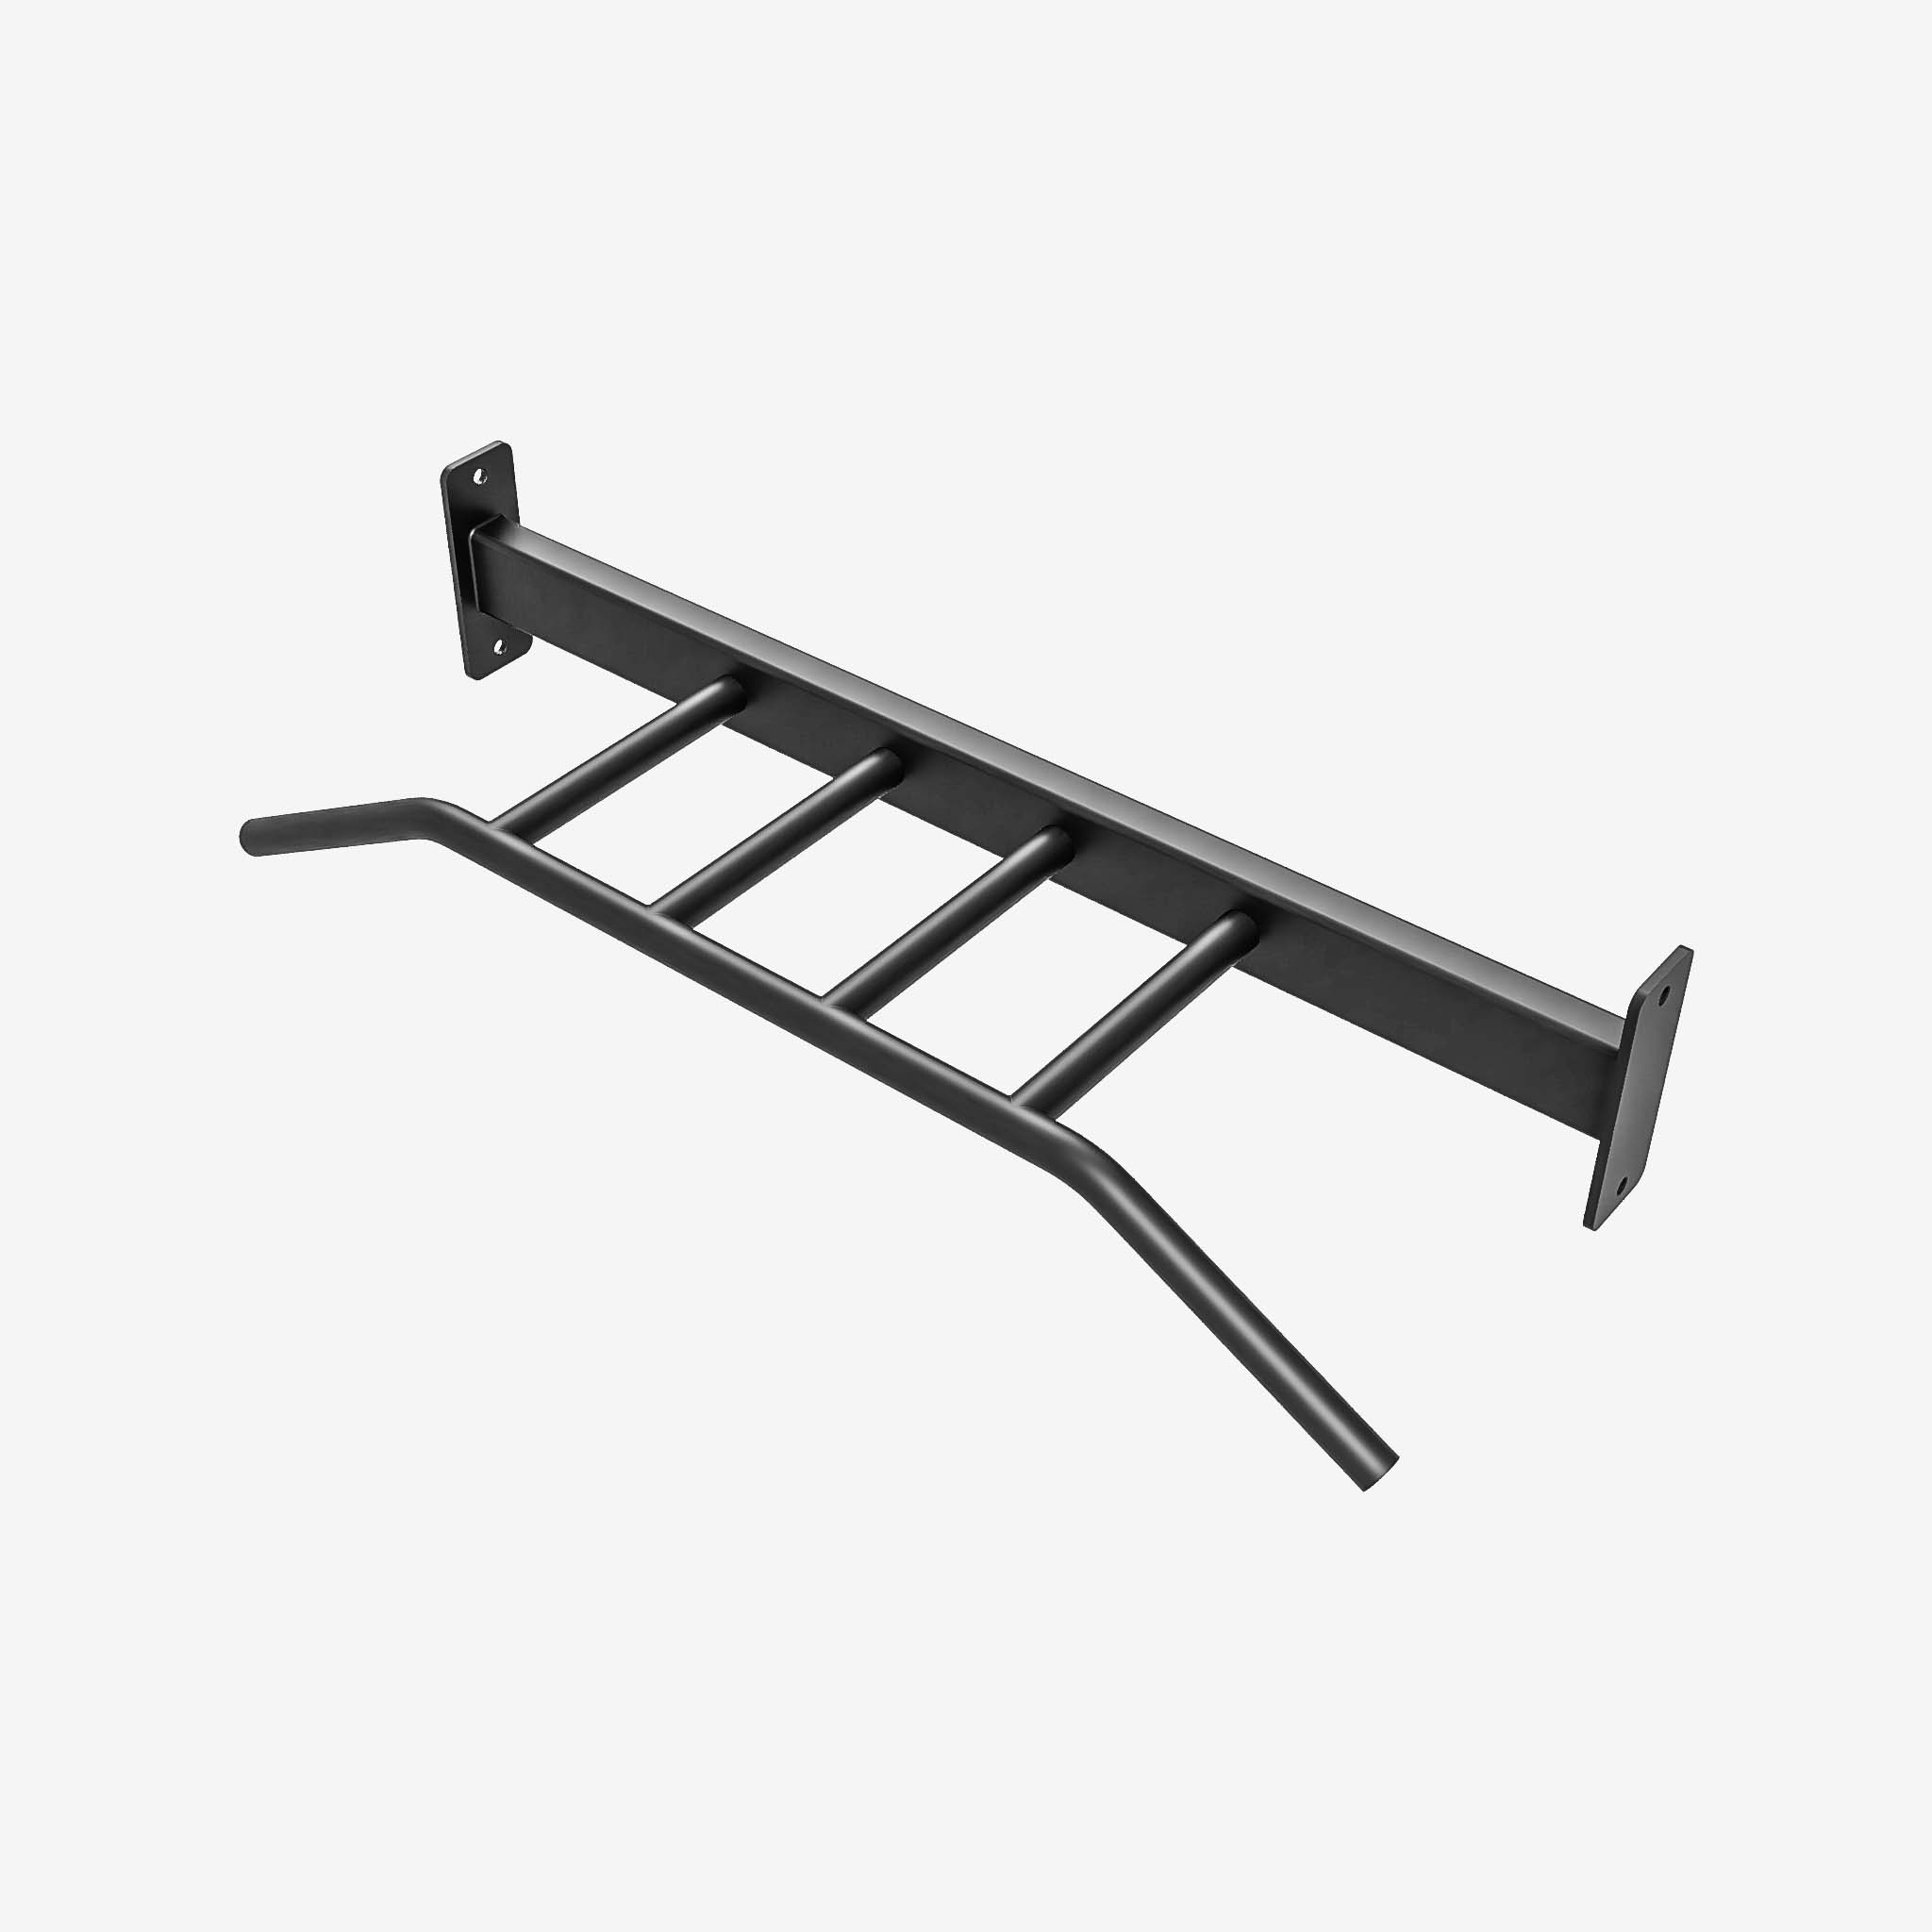 Featured image for “Multi-Grip Pull Up Bar 1080mm”